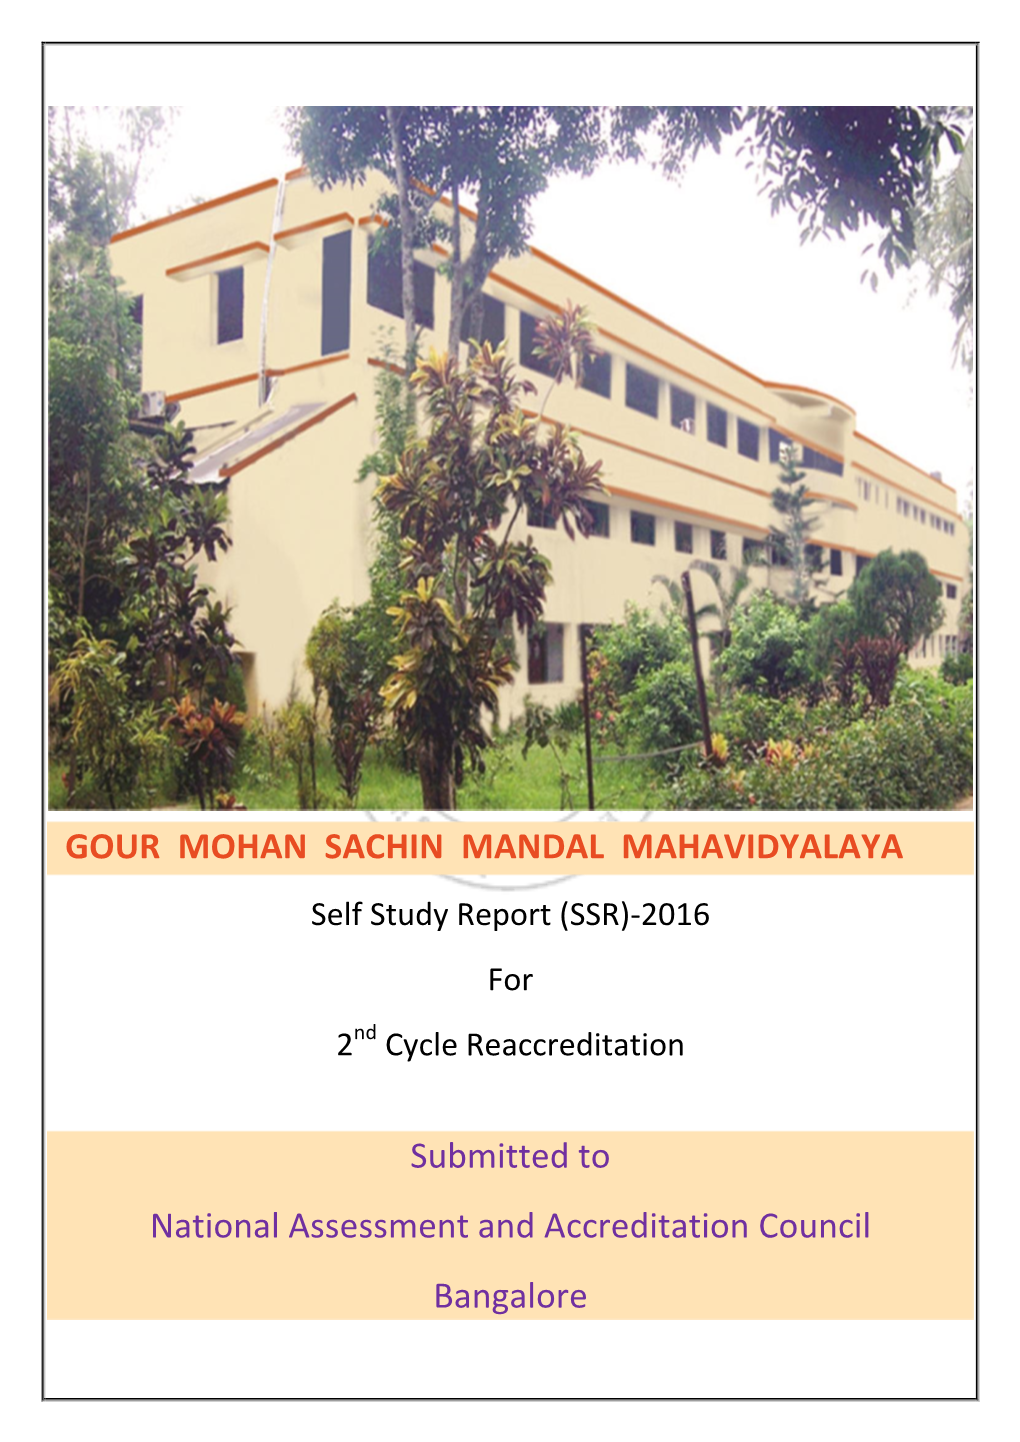 SSR)-2016 for 2Nd Cycle Reaccreditation